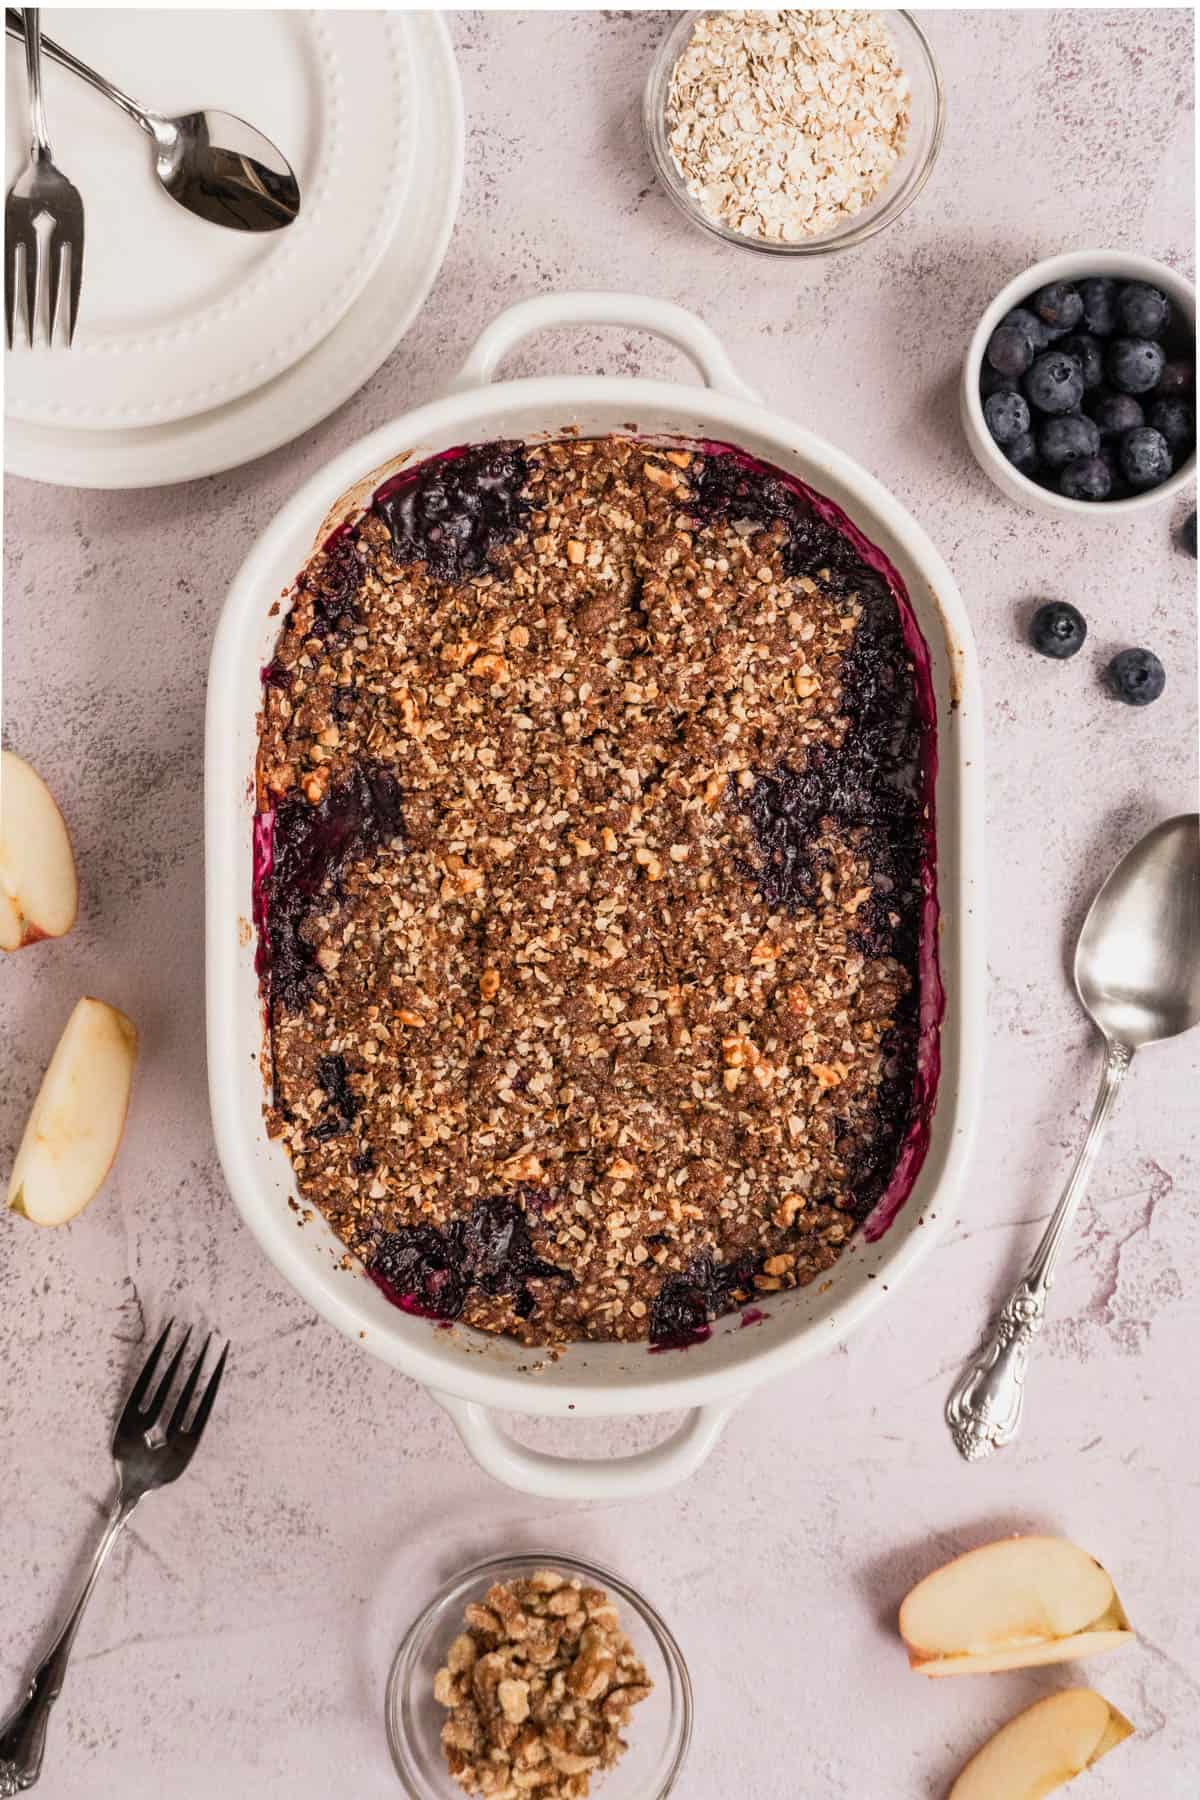 apple-and-blueberry-crumble.